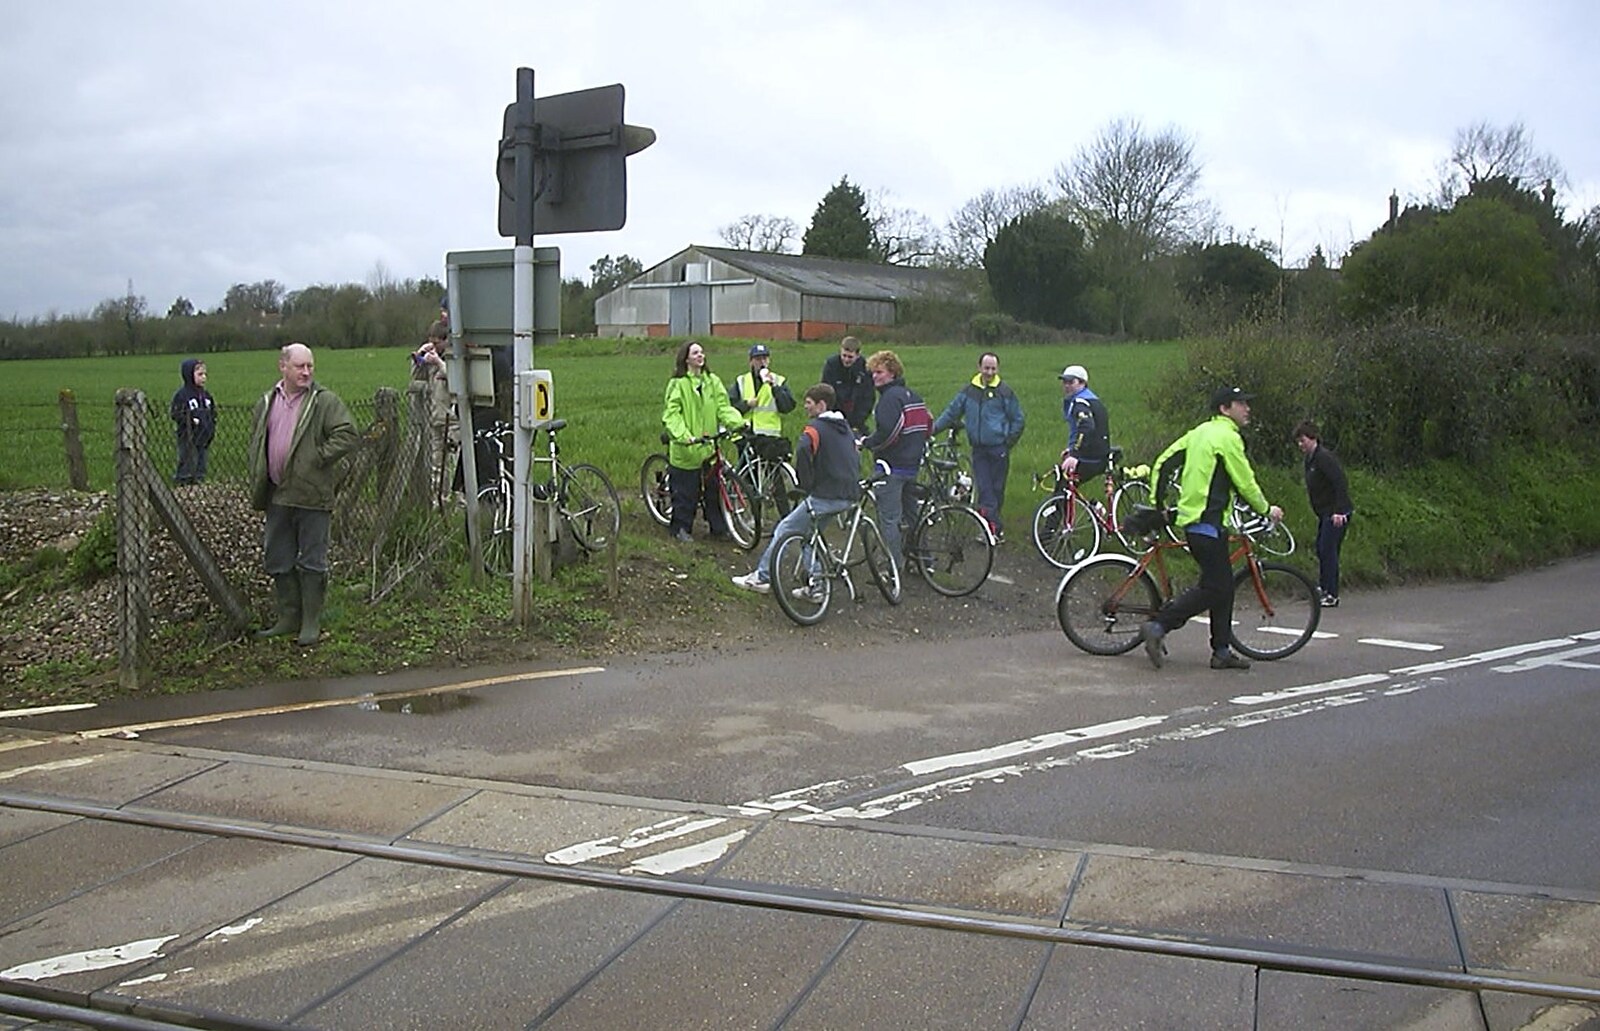 The BSCC Easter Bike Ride, Thelnetham and Redgrave, Suffolk - 10th April 2004: We stop at the level crossing in Palgrave